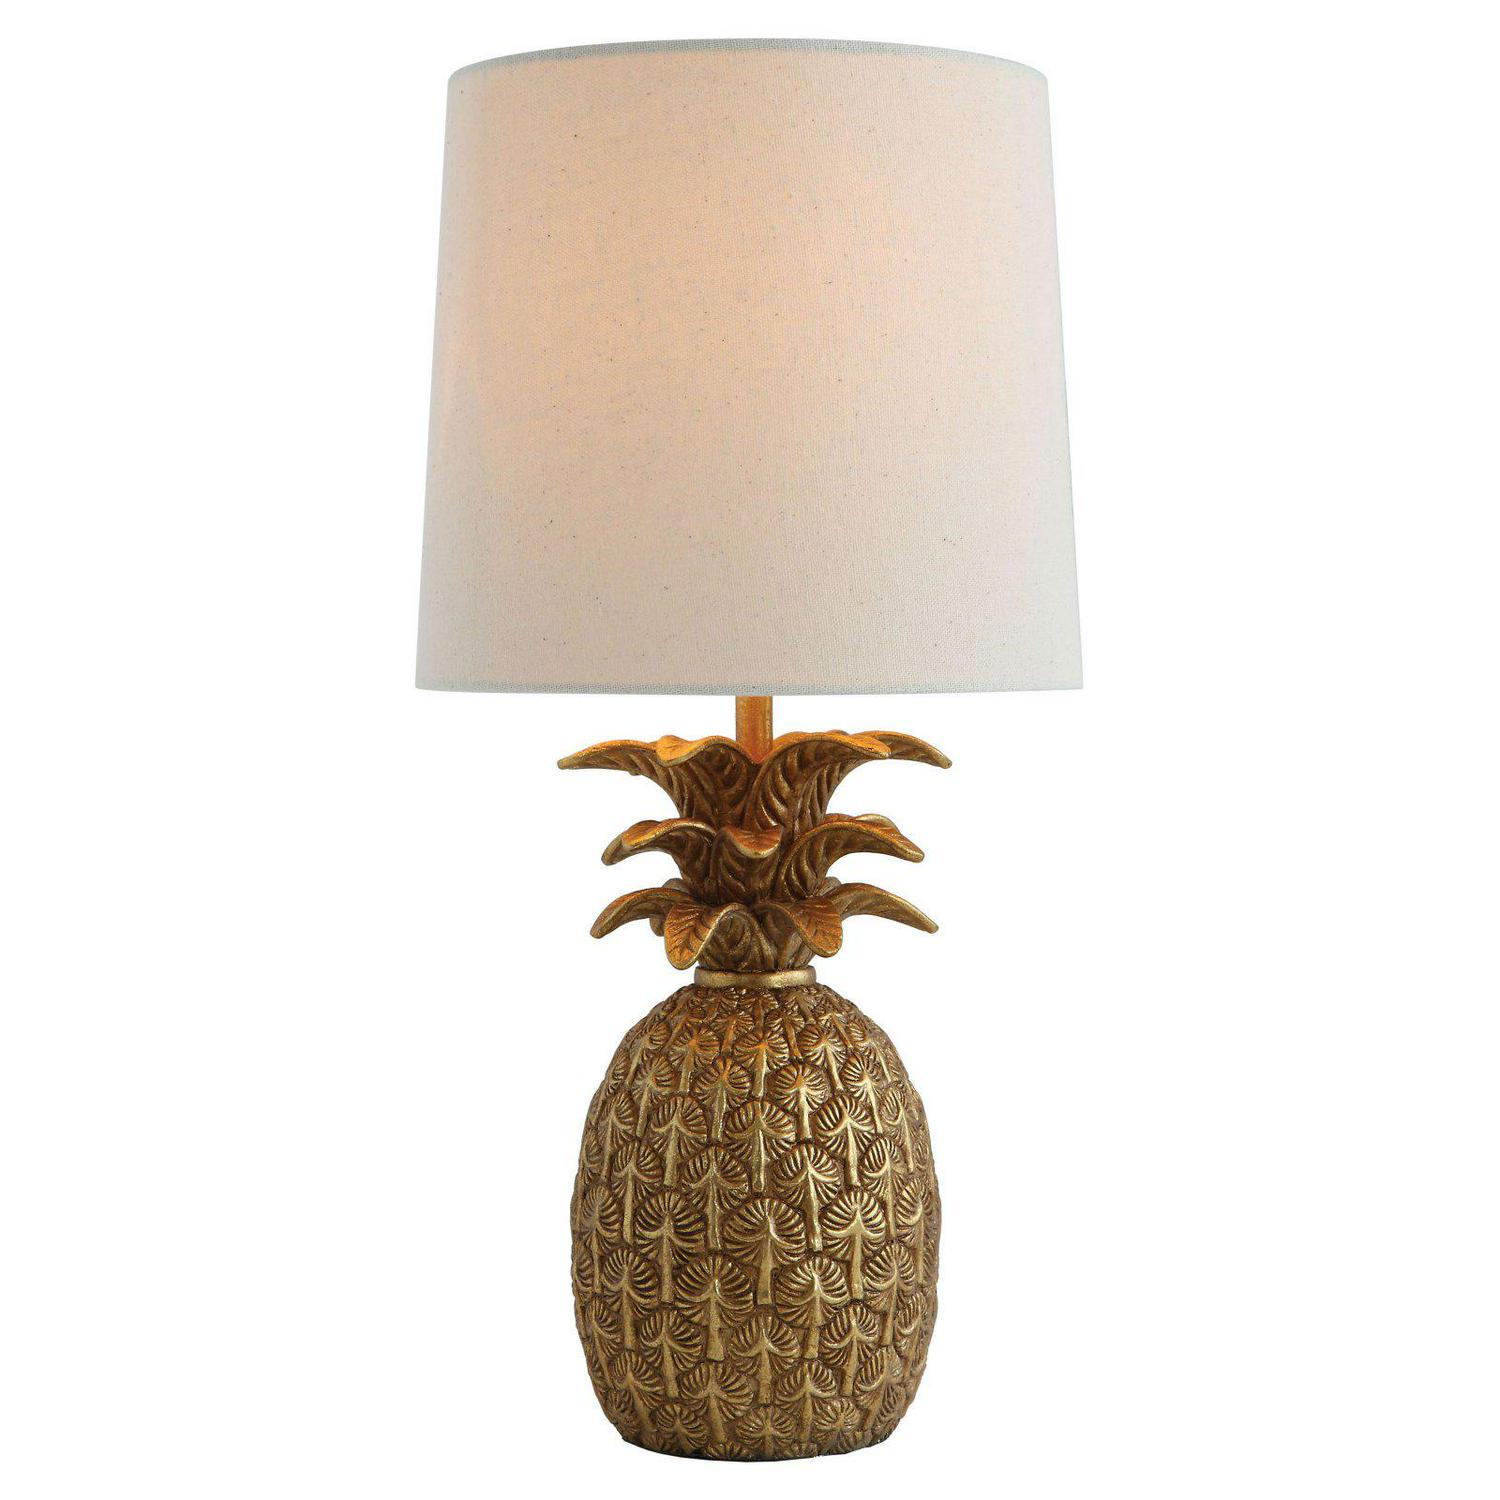 Desert Fields Resin Pineapple Table Lamp with Shade， 9 x 4.75 x 18 ， Black and Natural